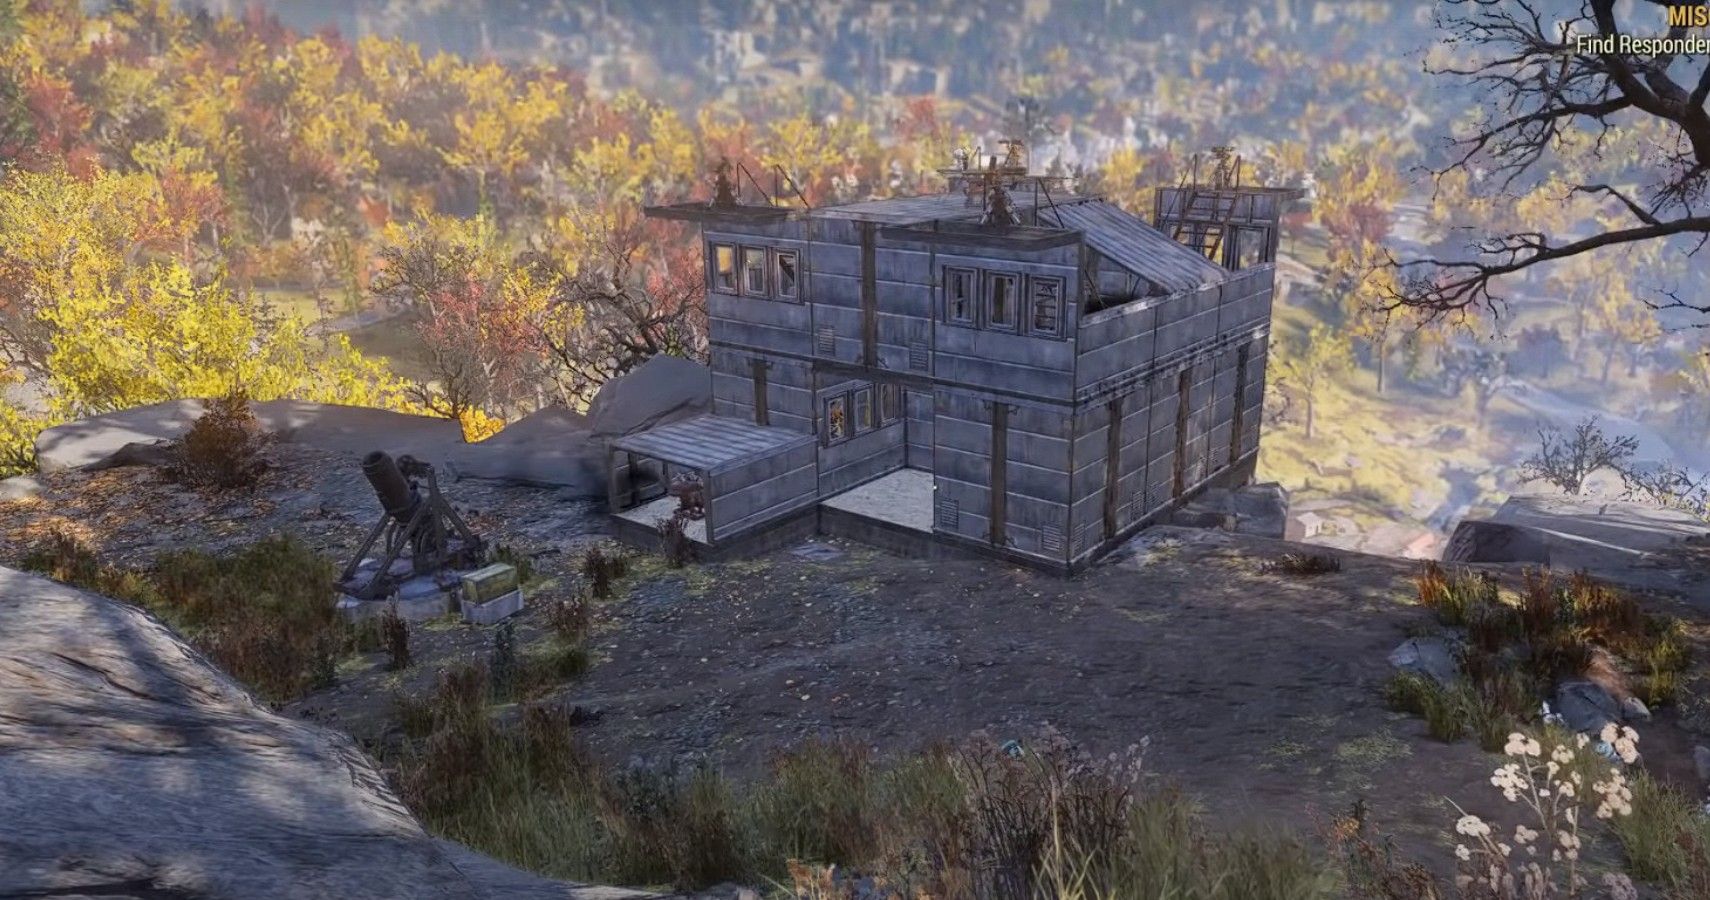 Gallery of Fallout 76 Builds.